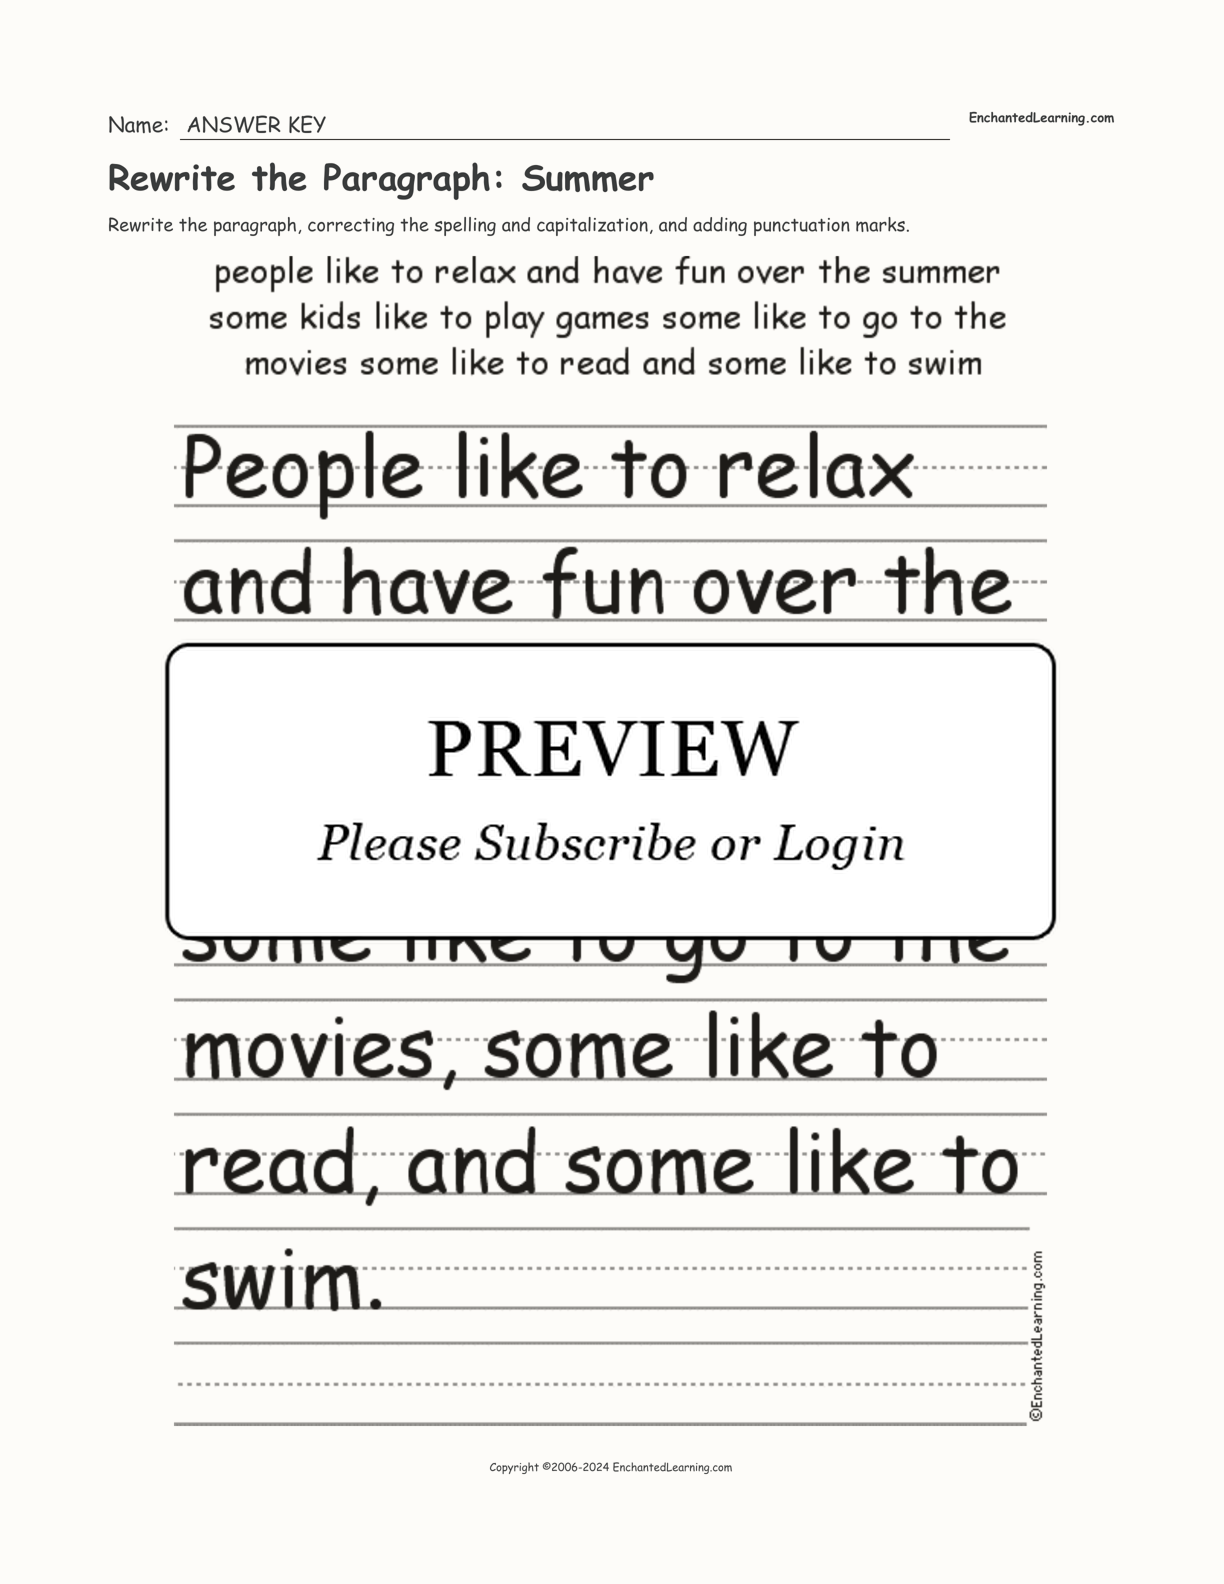 Rewrite the Paragraph: Summer interactive worksheet page 2